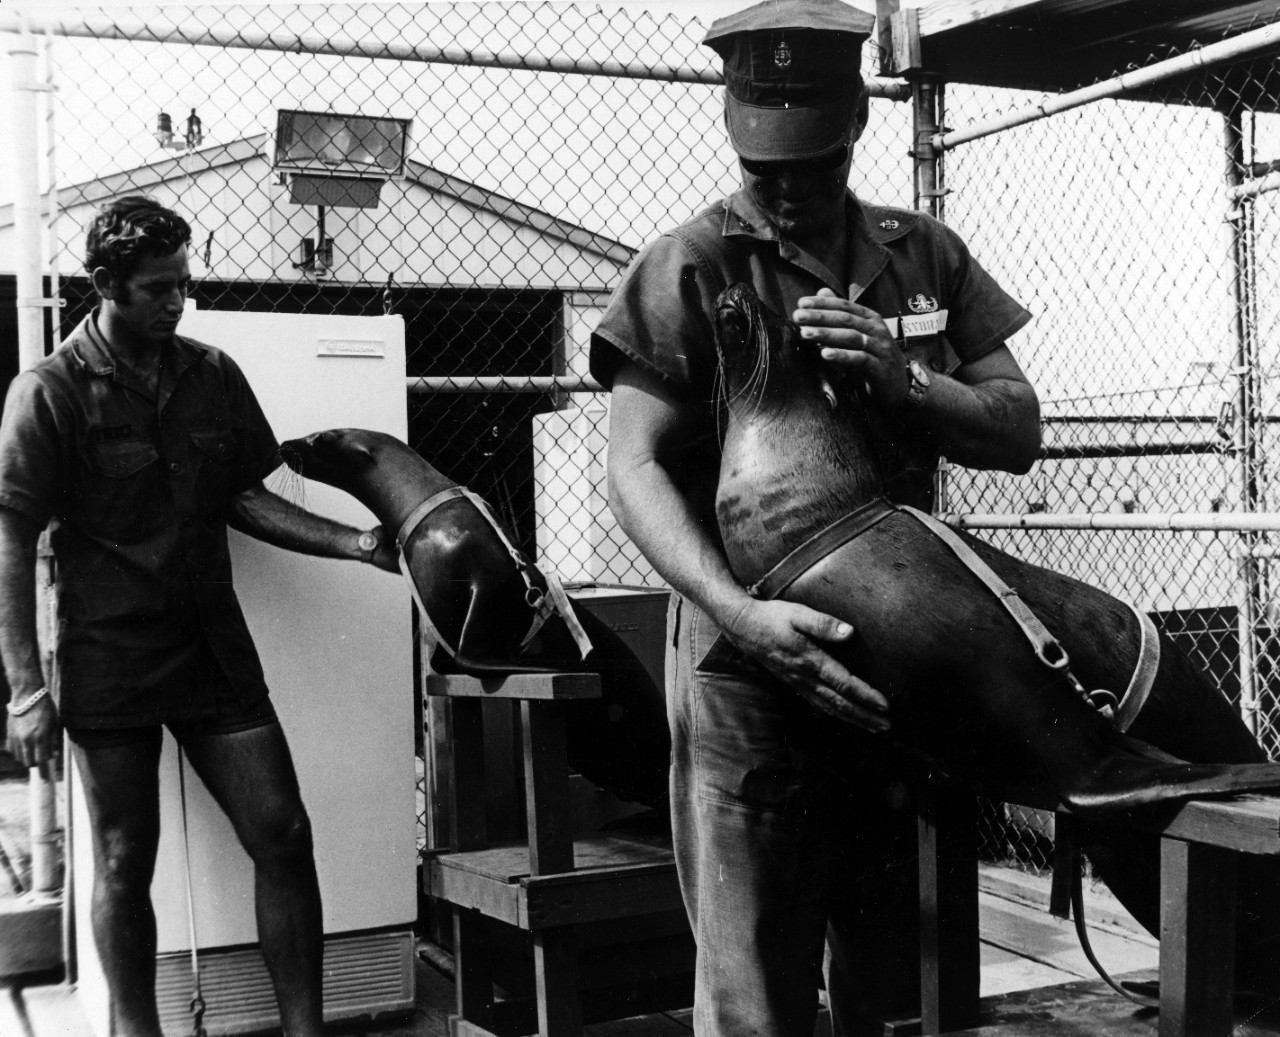 Pacific Ocean - Naval Undersea Research and Development Center, Pasadena, CA, animal behaviorists, Jim Corey and Chief Torpedoman's Mate Gordon Sybrant, harness sea lions "fatman" and "turk" on the harnessing stand prior to the animals diving into the open sea for a training session. November 1970. 